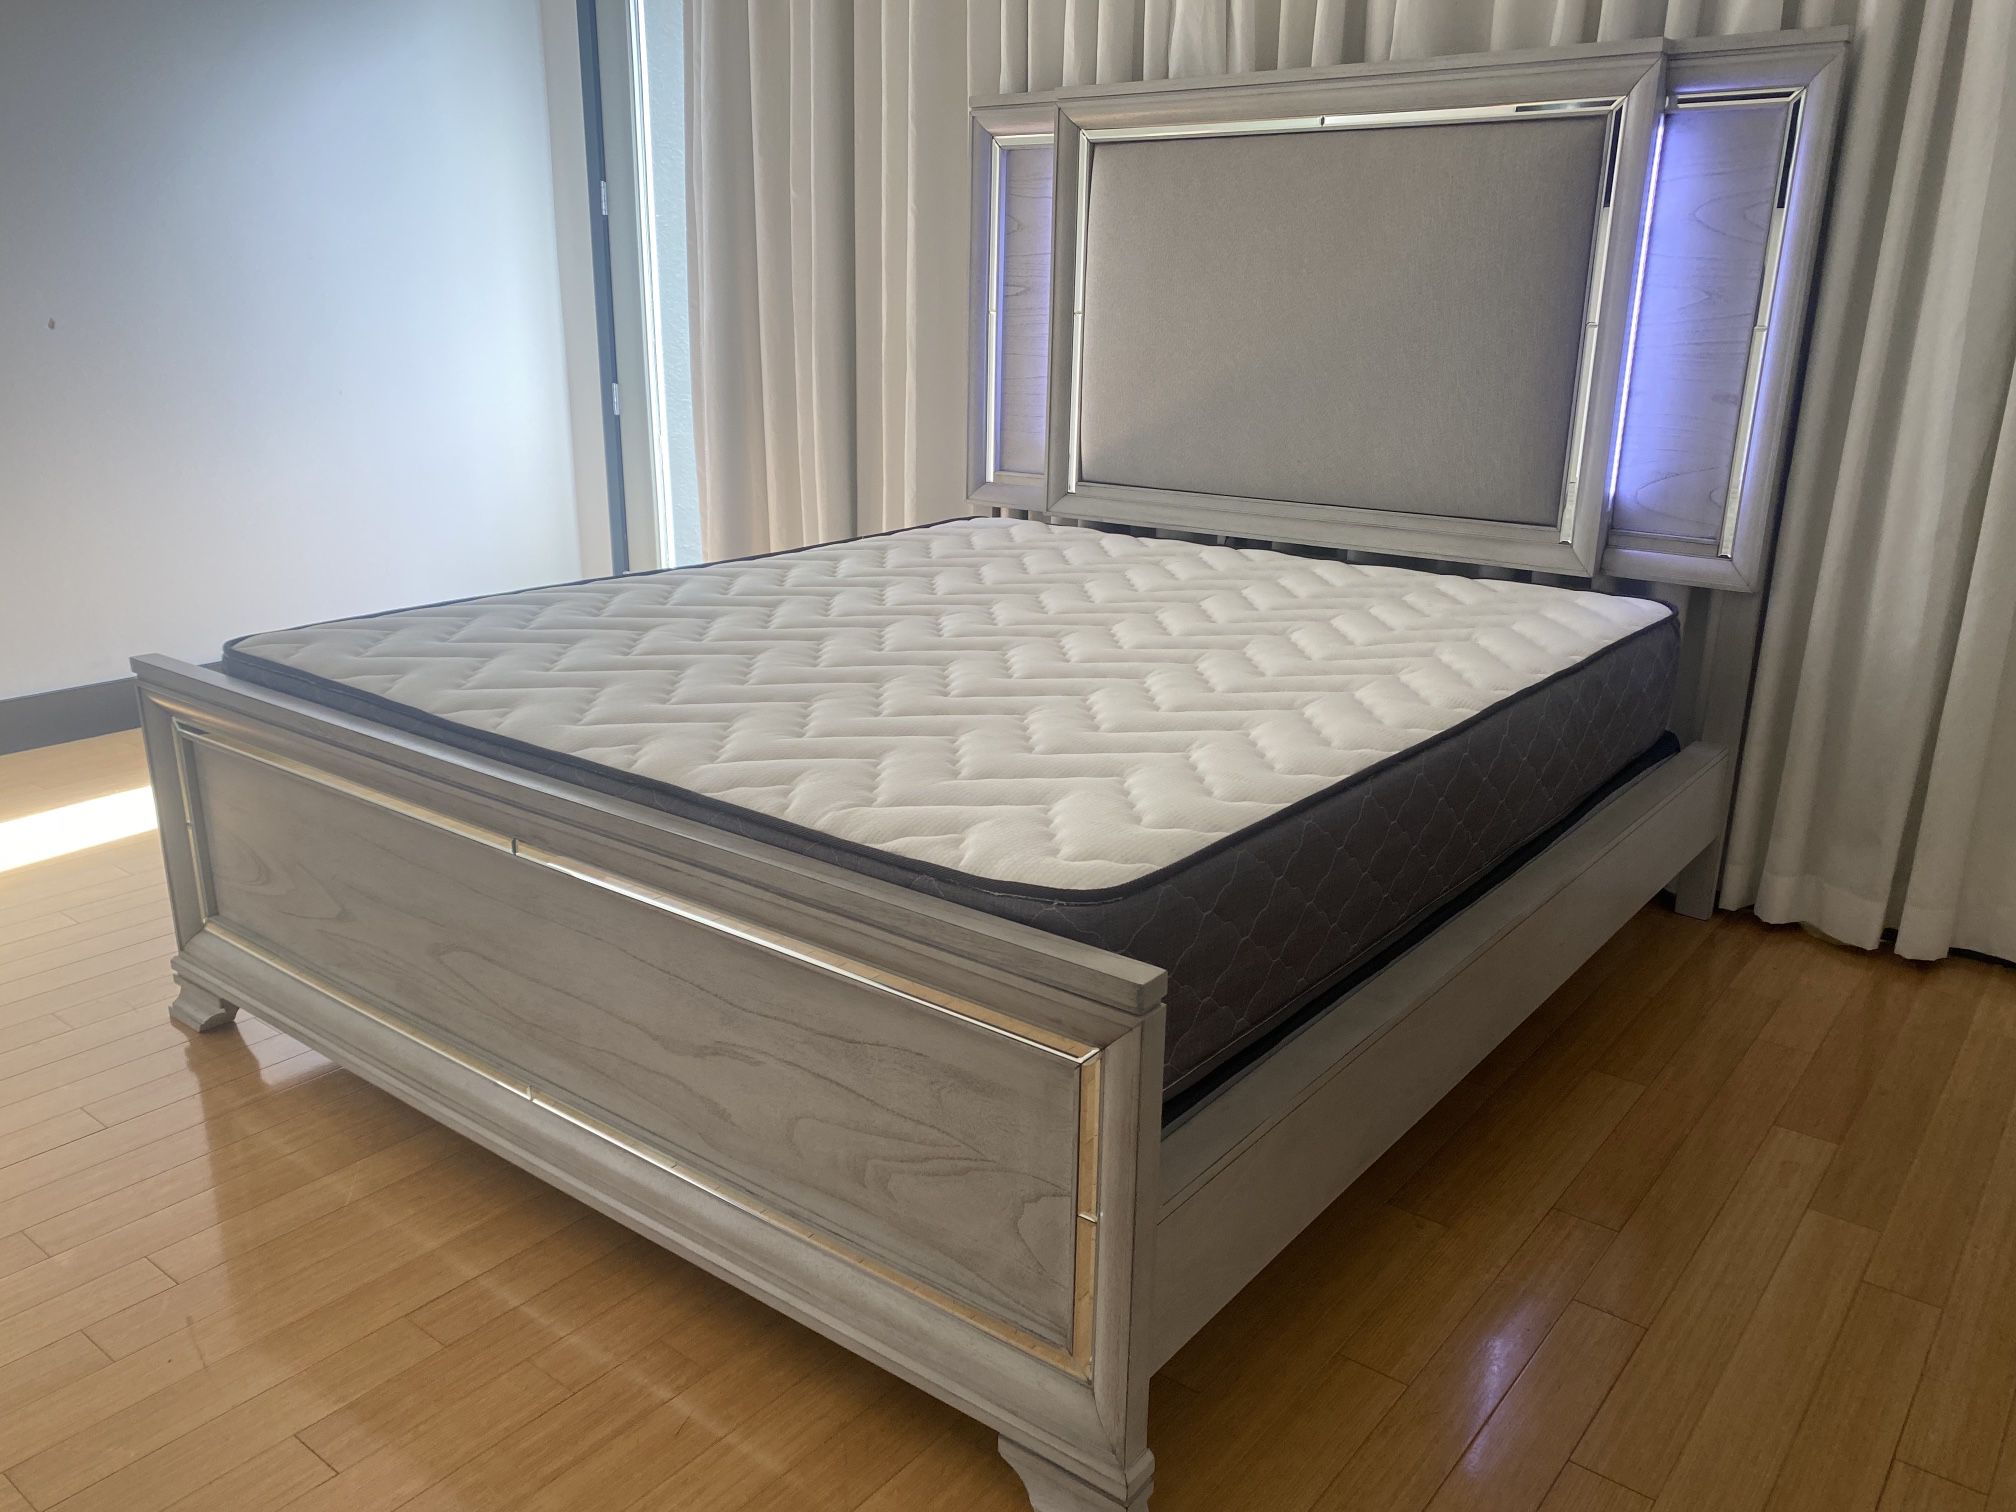 NEW OFFER!!✨✨Queen Light Gray Bed w/ LED Light Bed (Mattress is not Included)✨✨